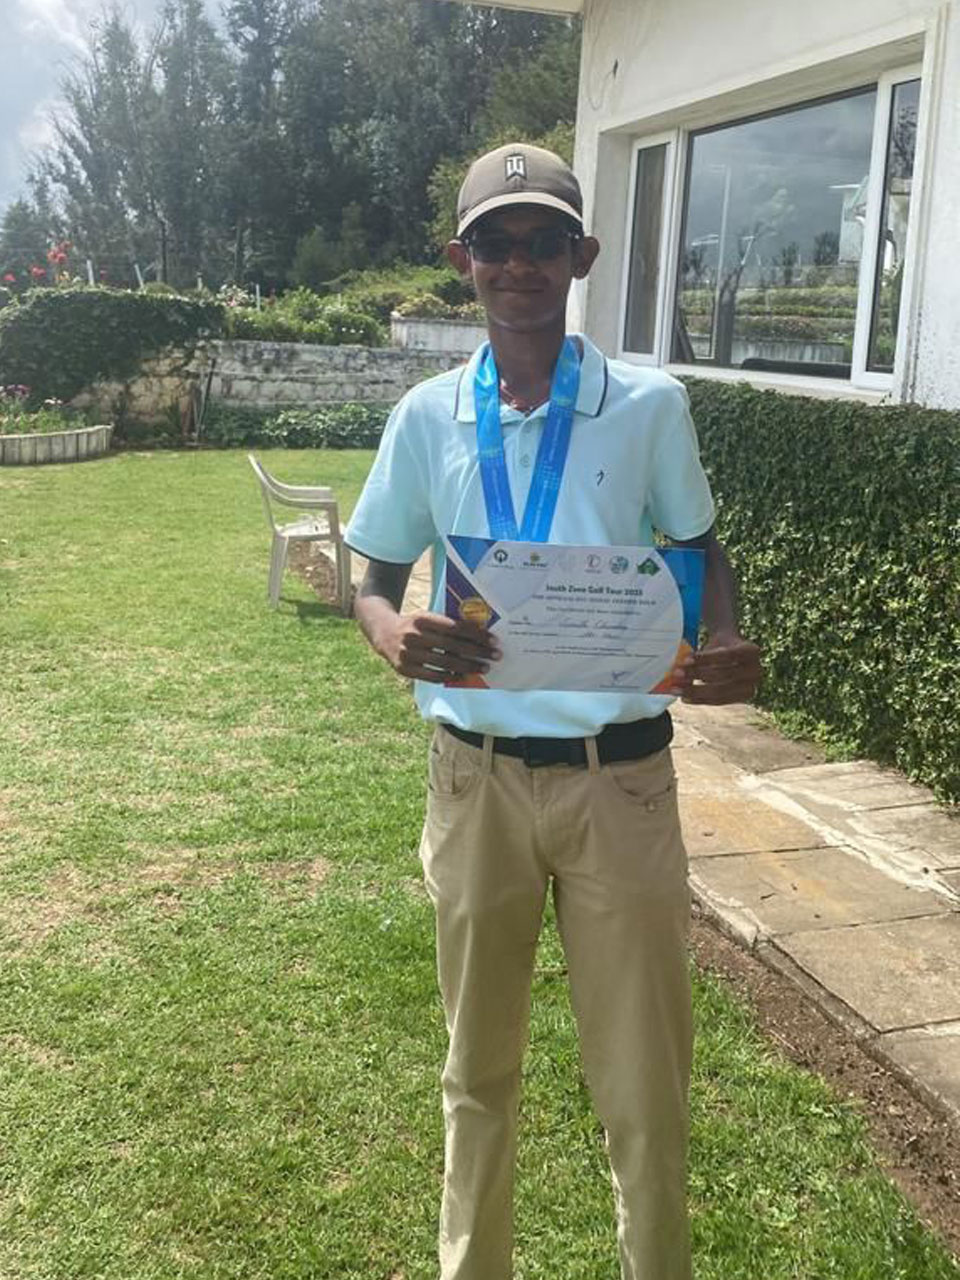 Sumith Chandra finishes 2nd at the South Zone Junior Championship